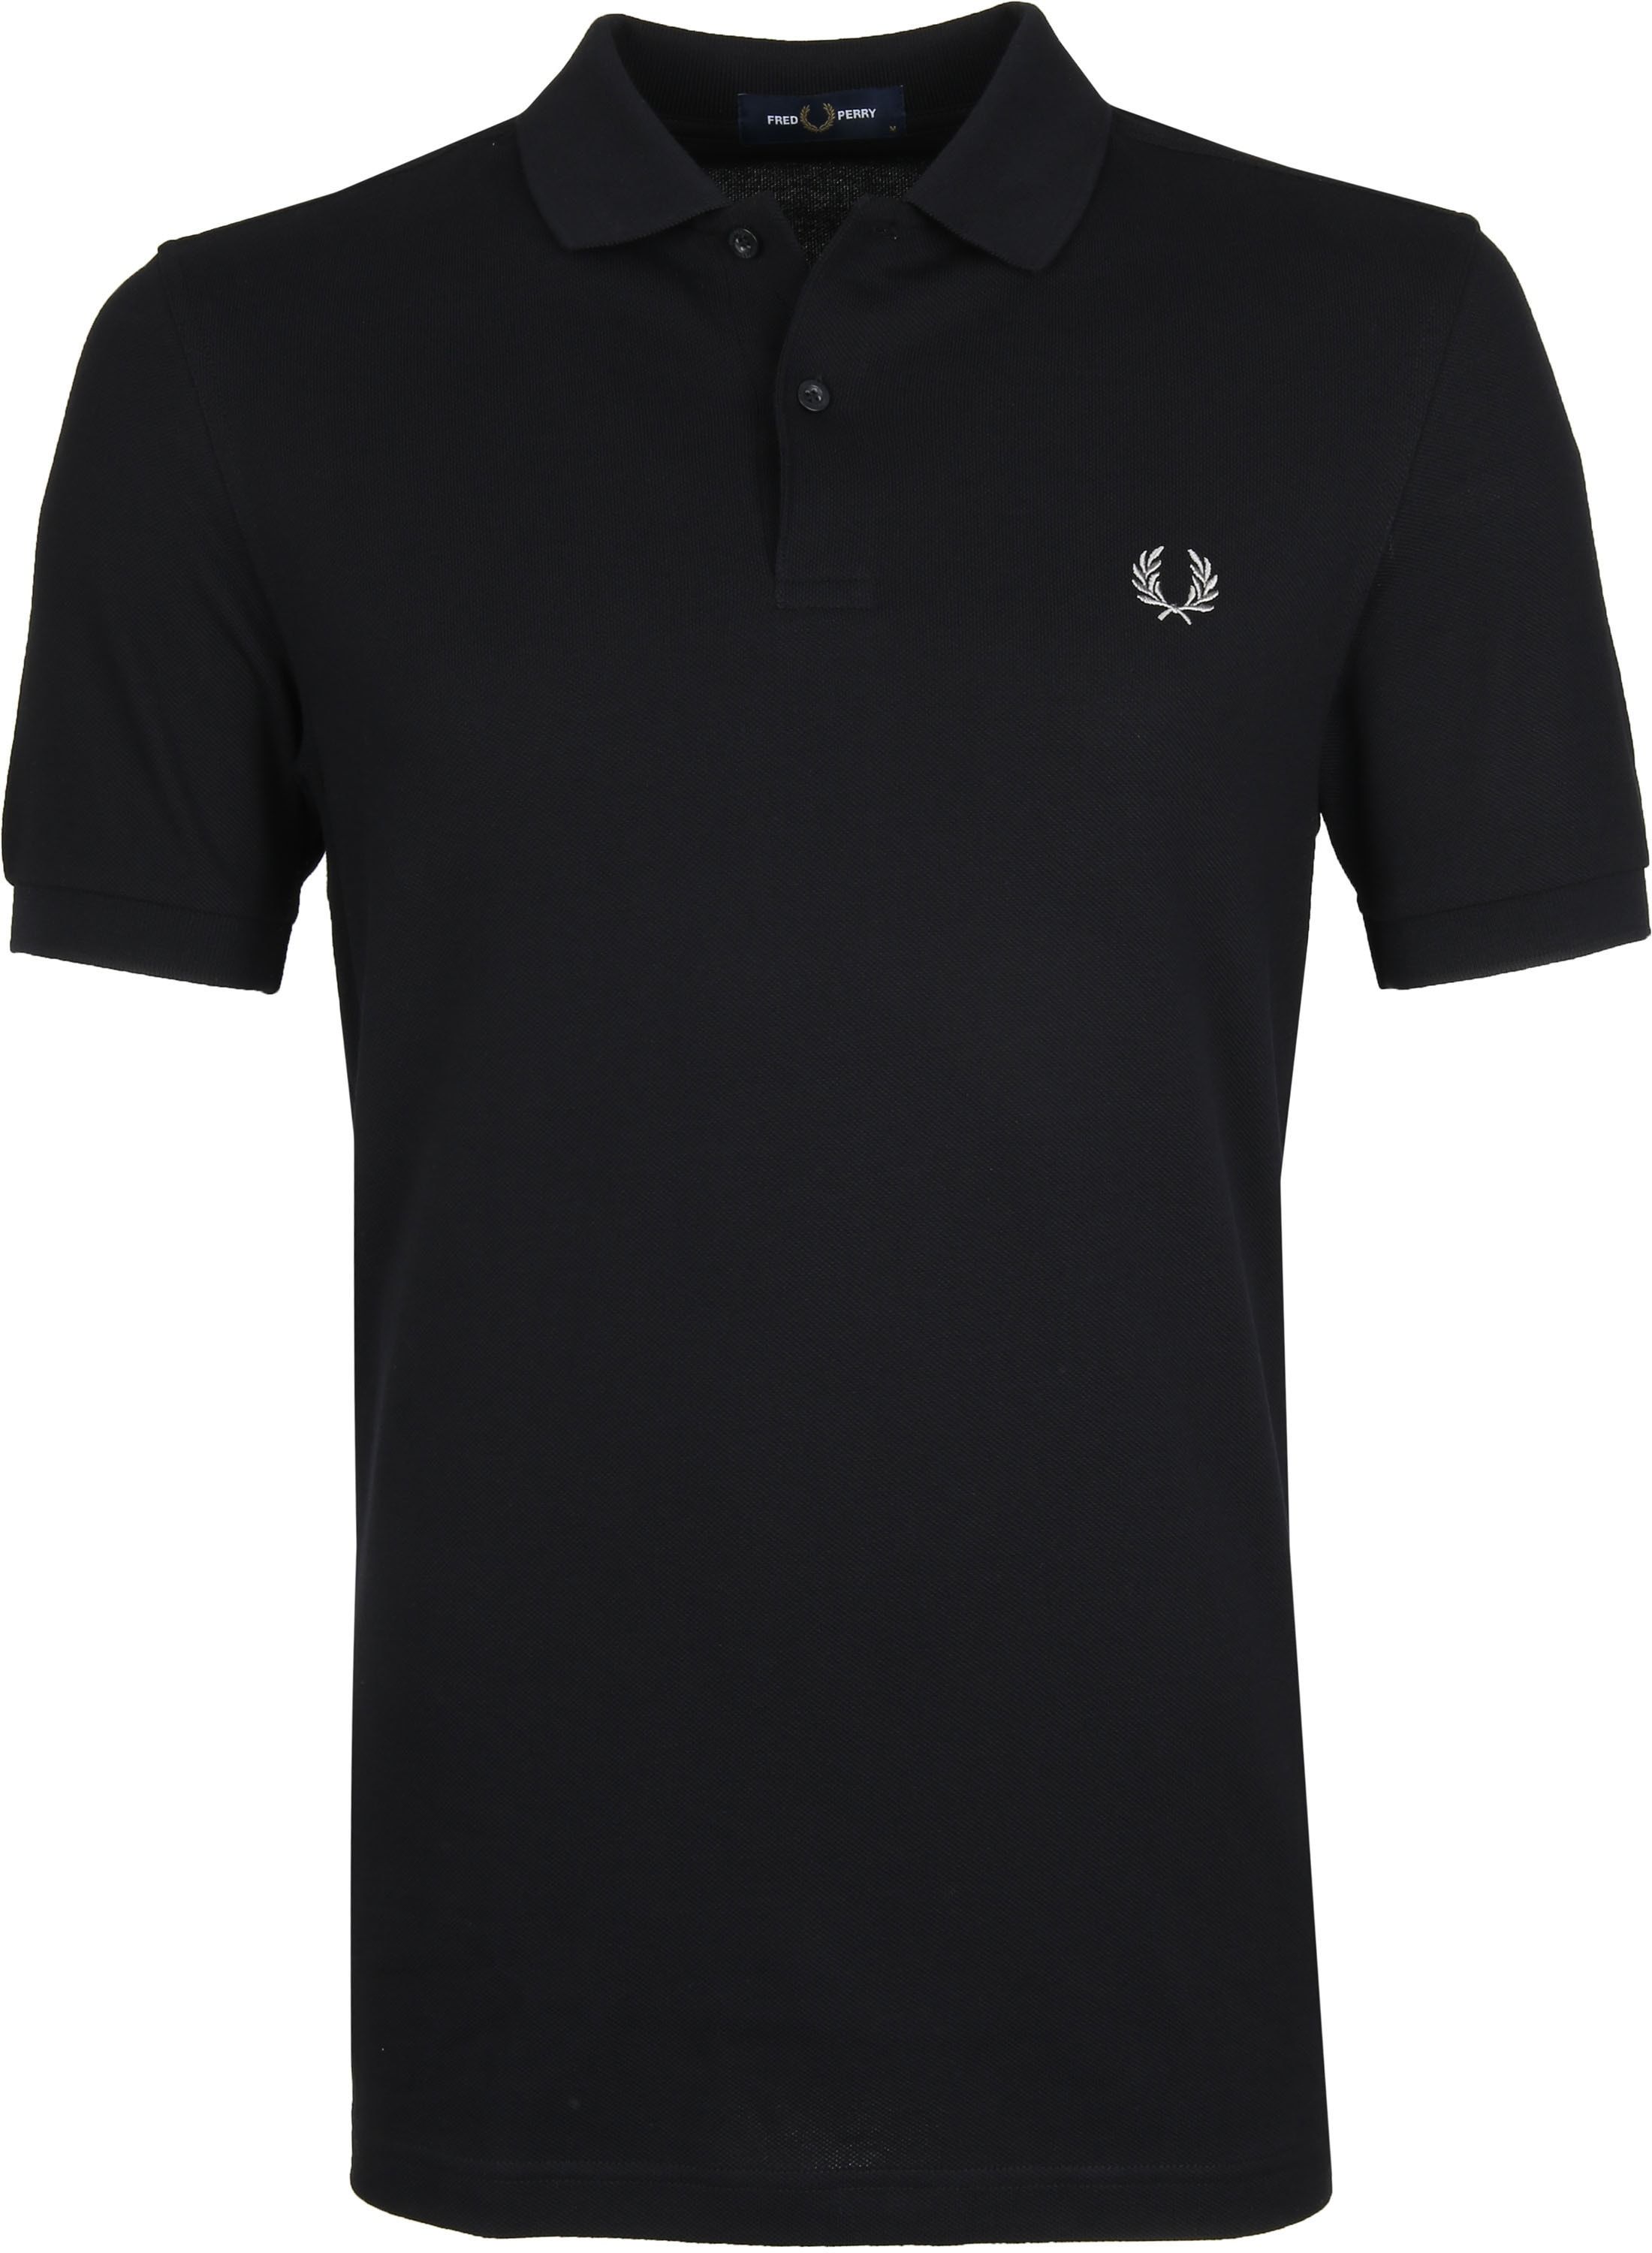 Fred Perry Polo Shirt 906 Black size M